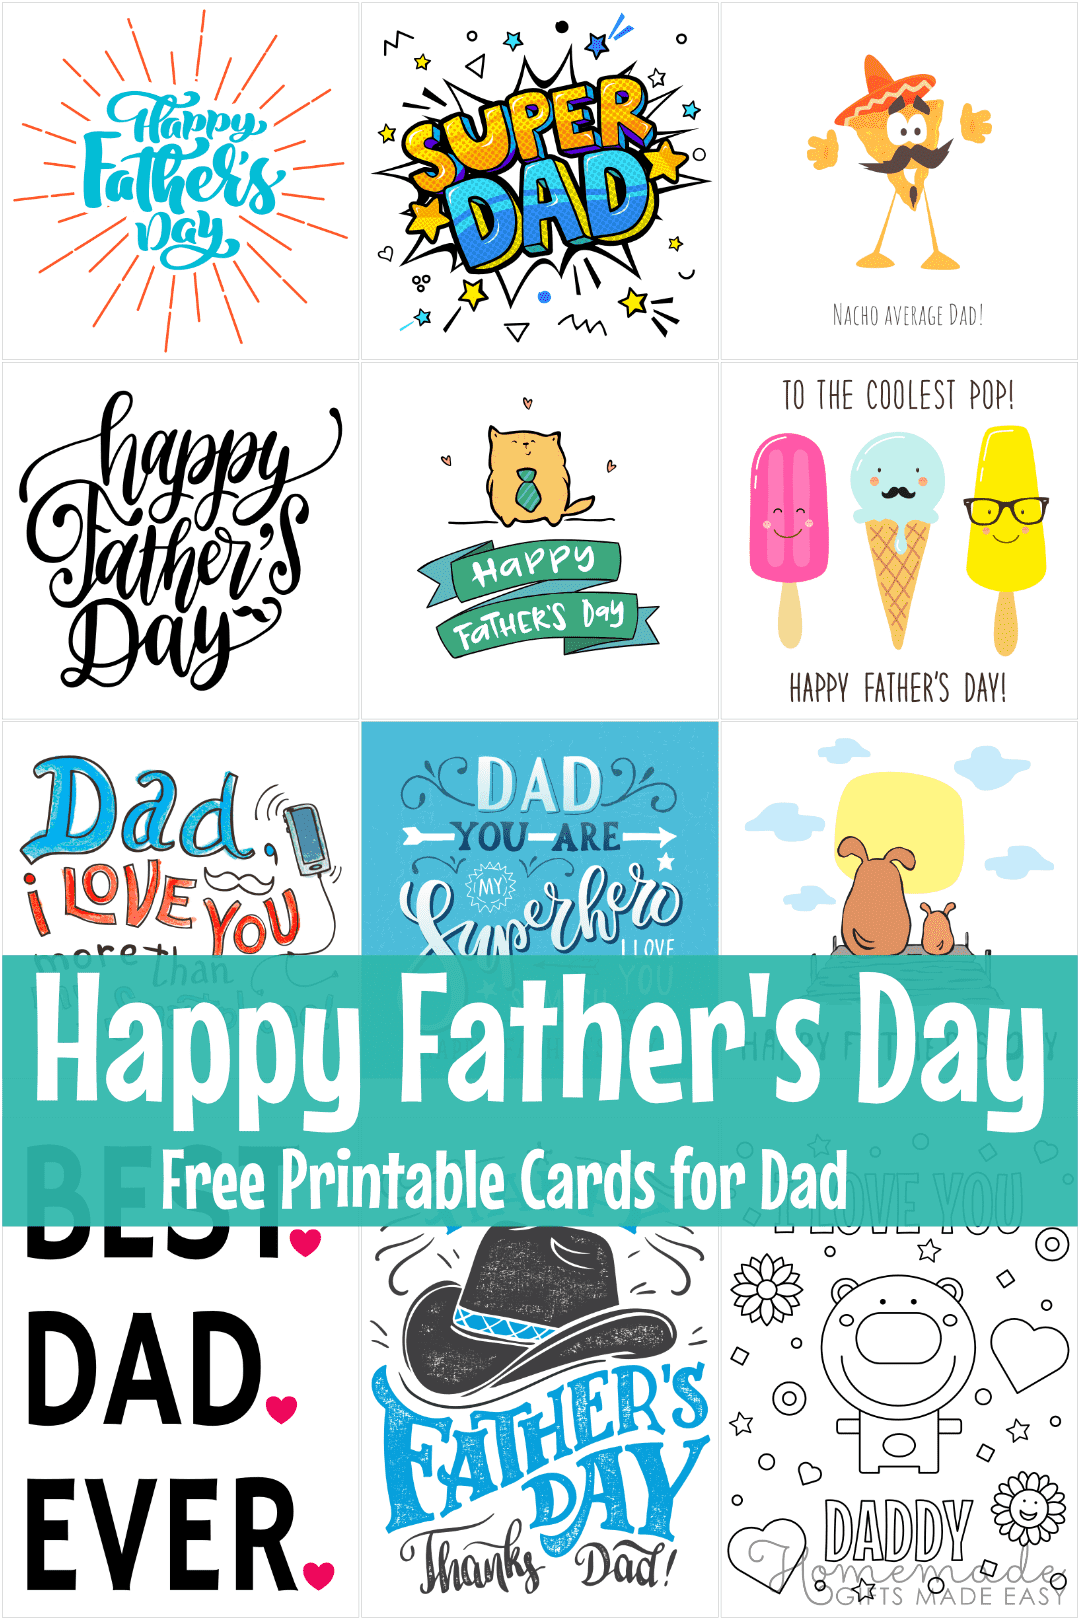 homemade-fathers-day-gifts-crafts-to-make